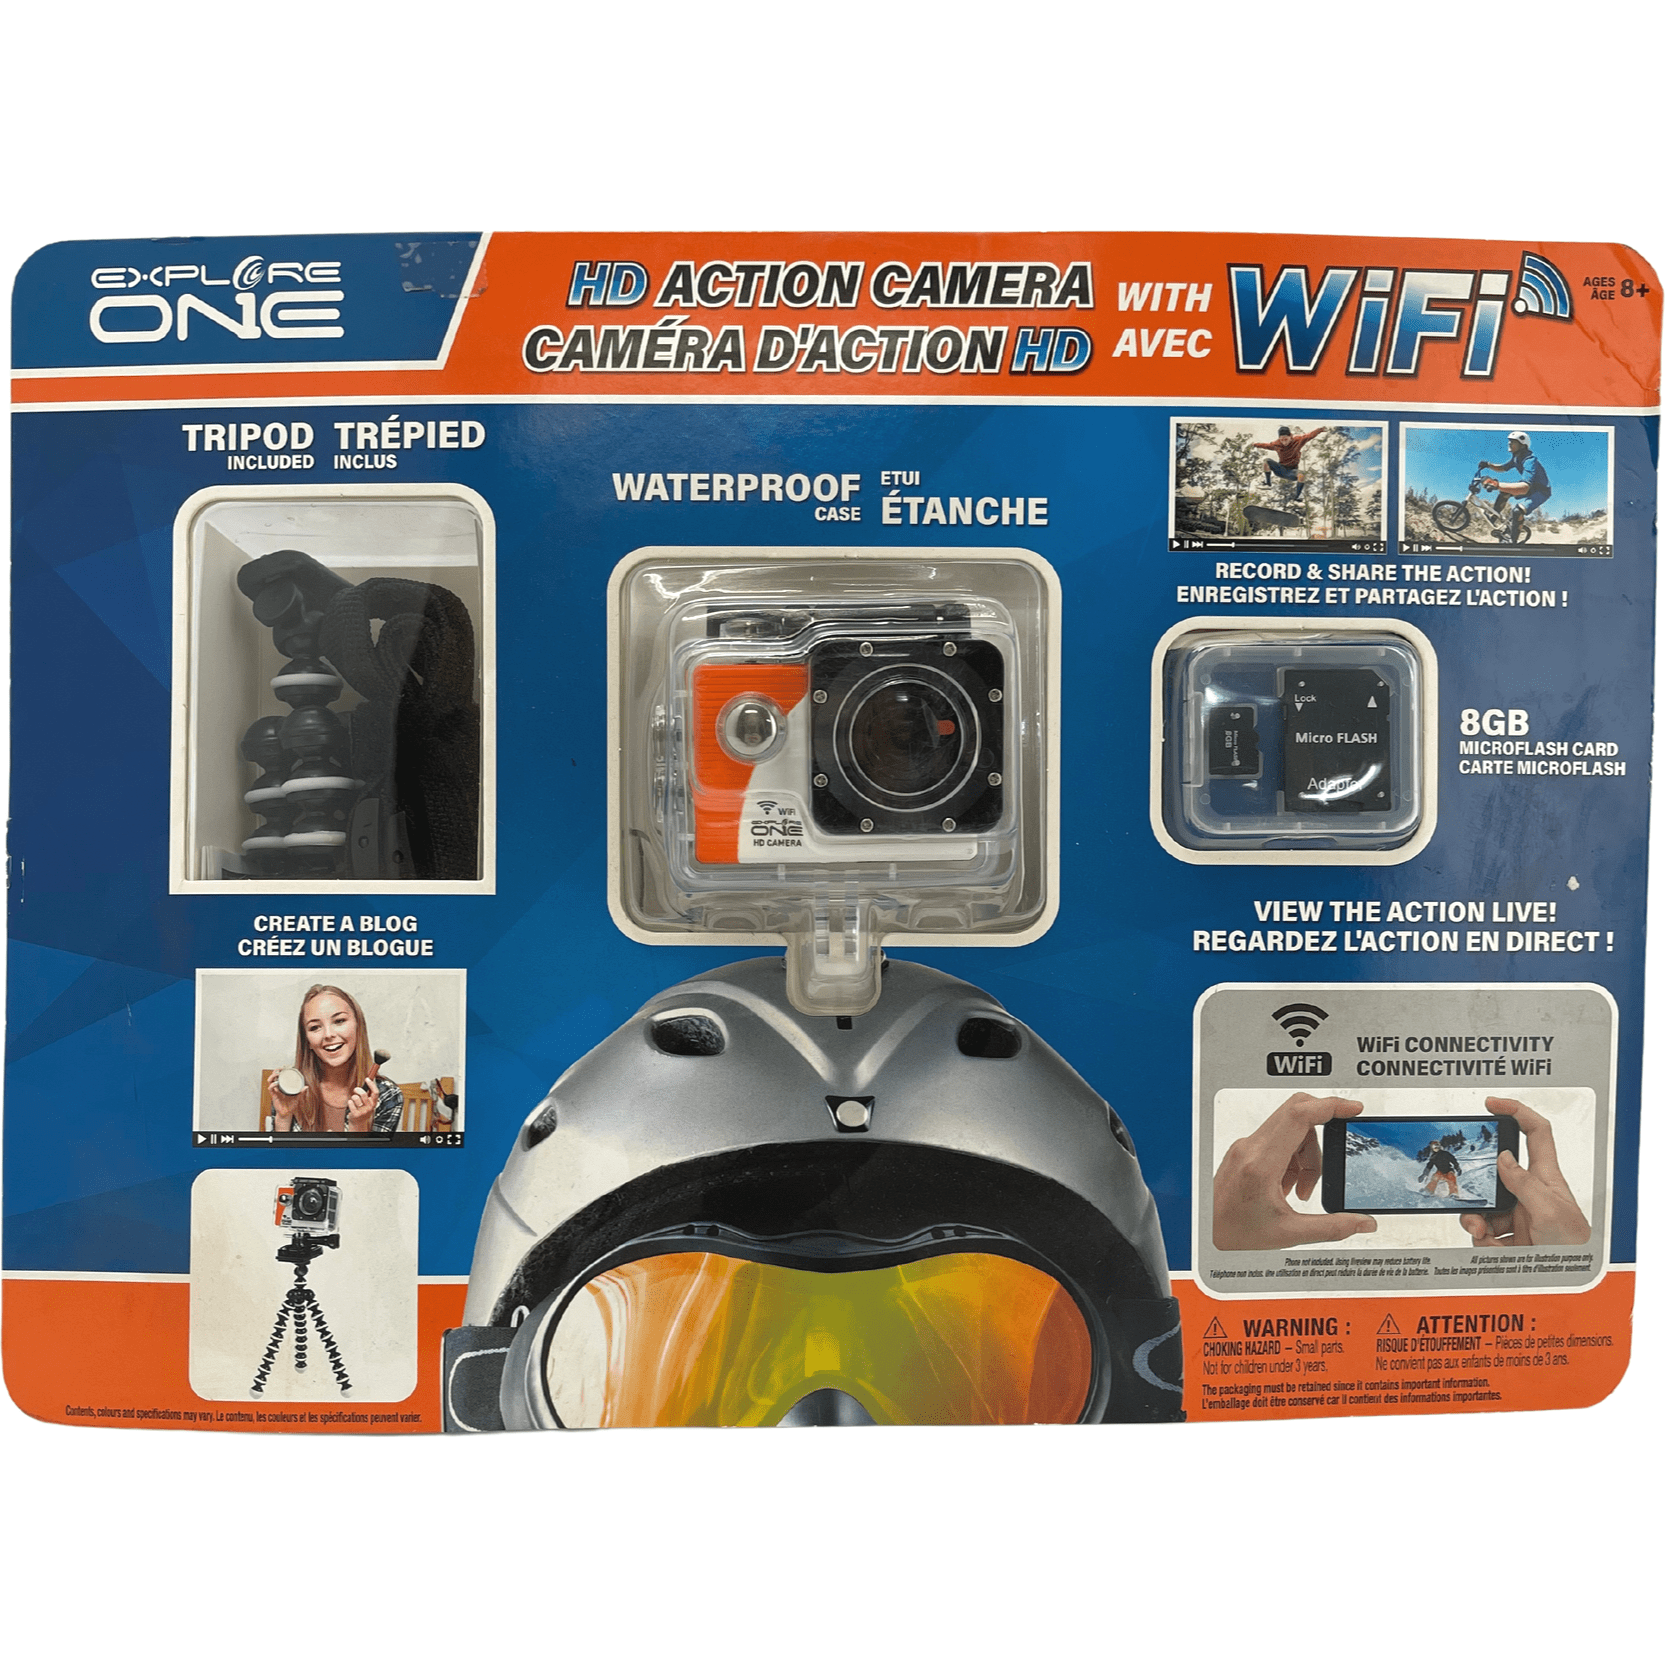 Explore One HD Action Camera / Camera Bundle with Accessories / With WiFi **DEALS**